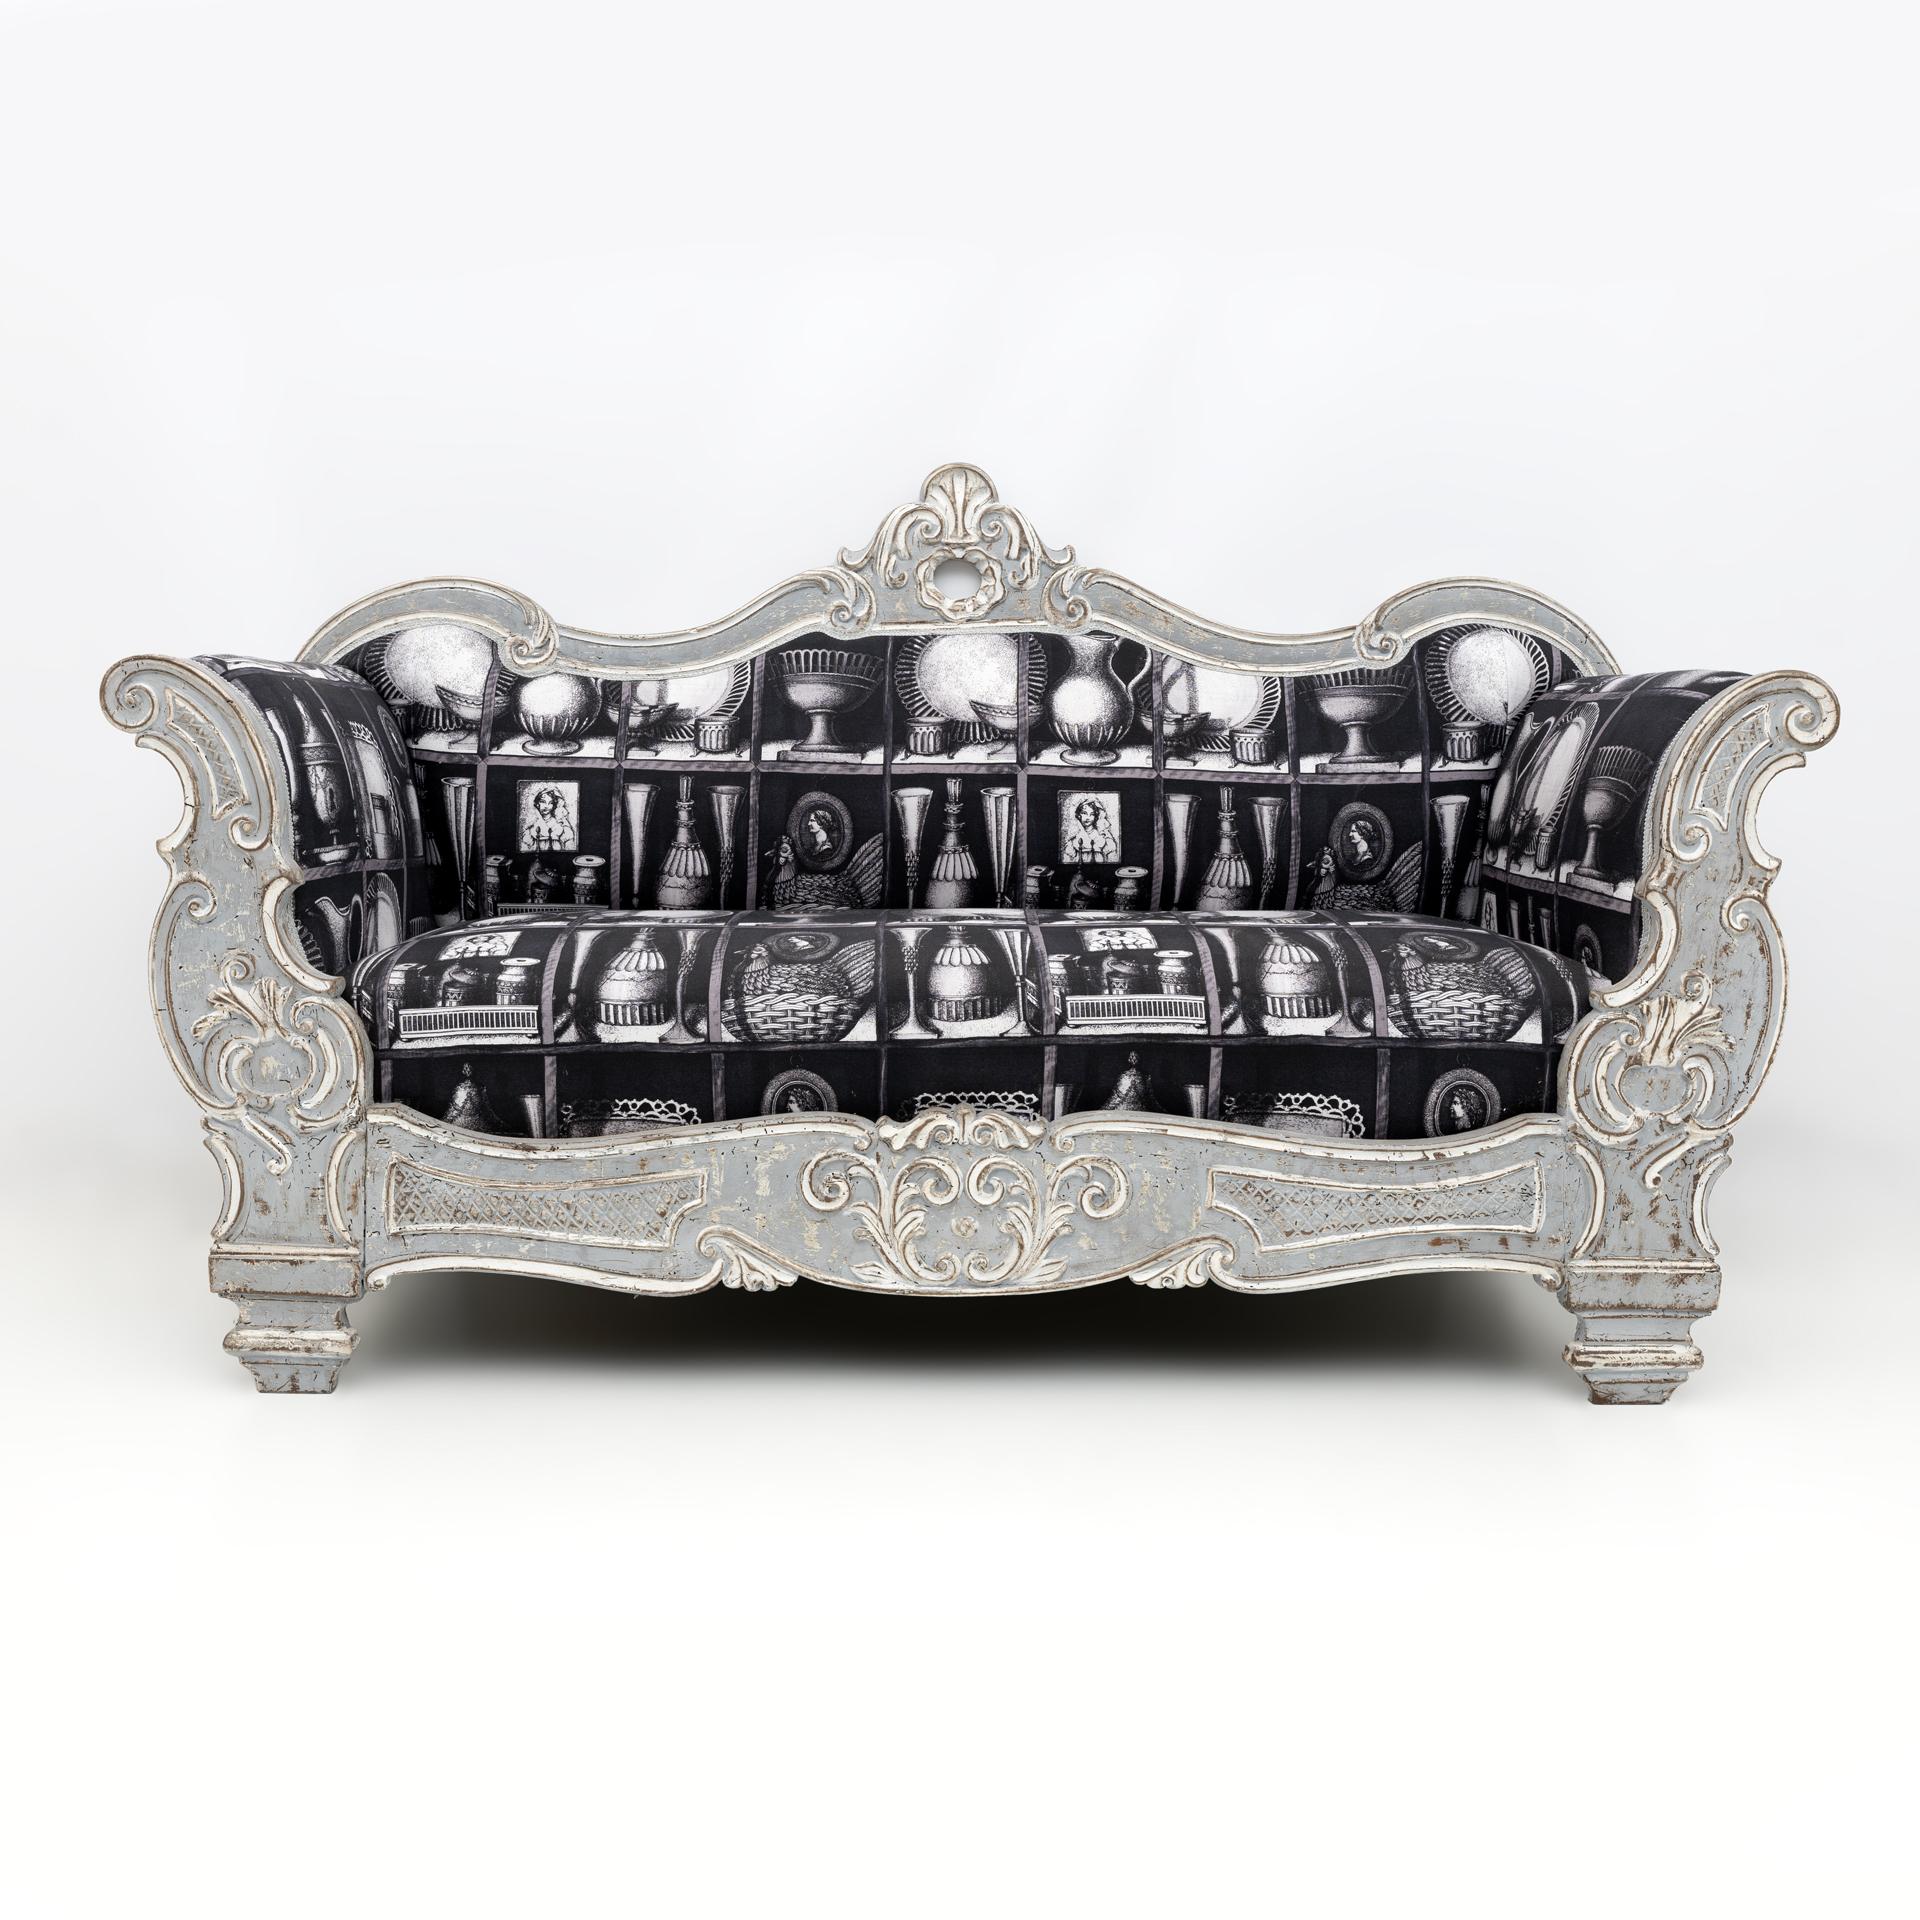 This Carlo X style boat sofa comes from a nineteenth-century villa on Lake Como, the gray and white lacquered sofa, shabby chic effect, has been upholstered with original Fornasetti linen fabric, see signature as shown in the photo.